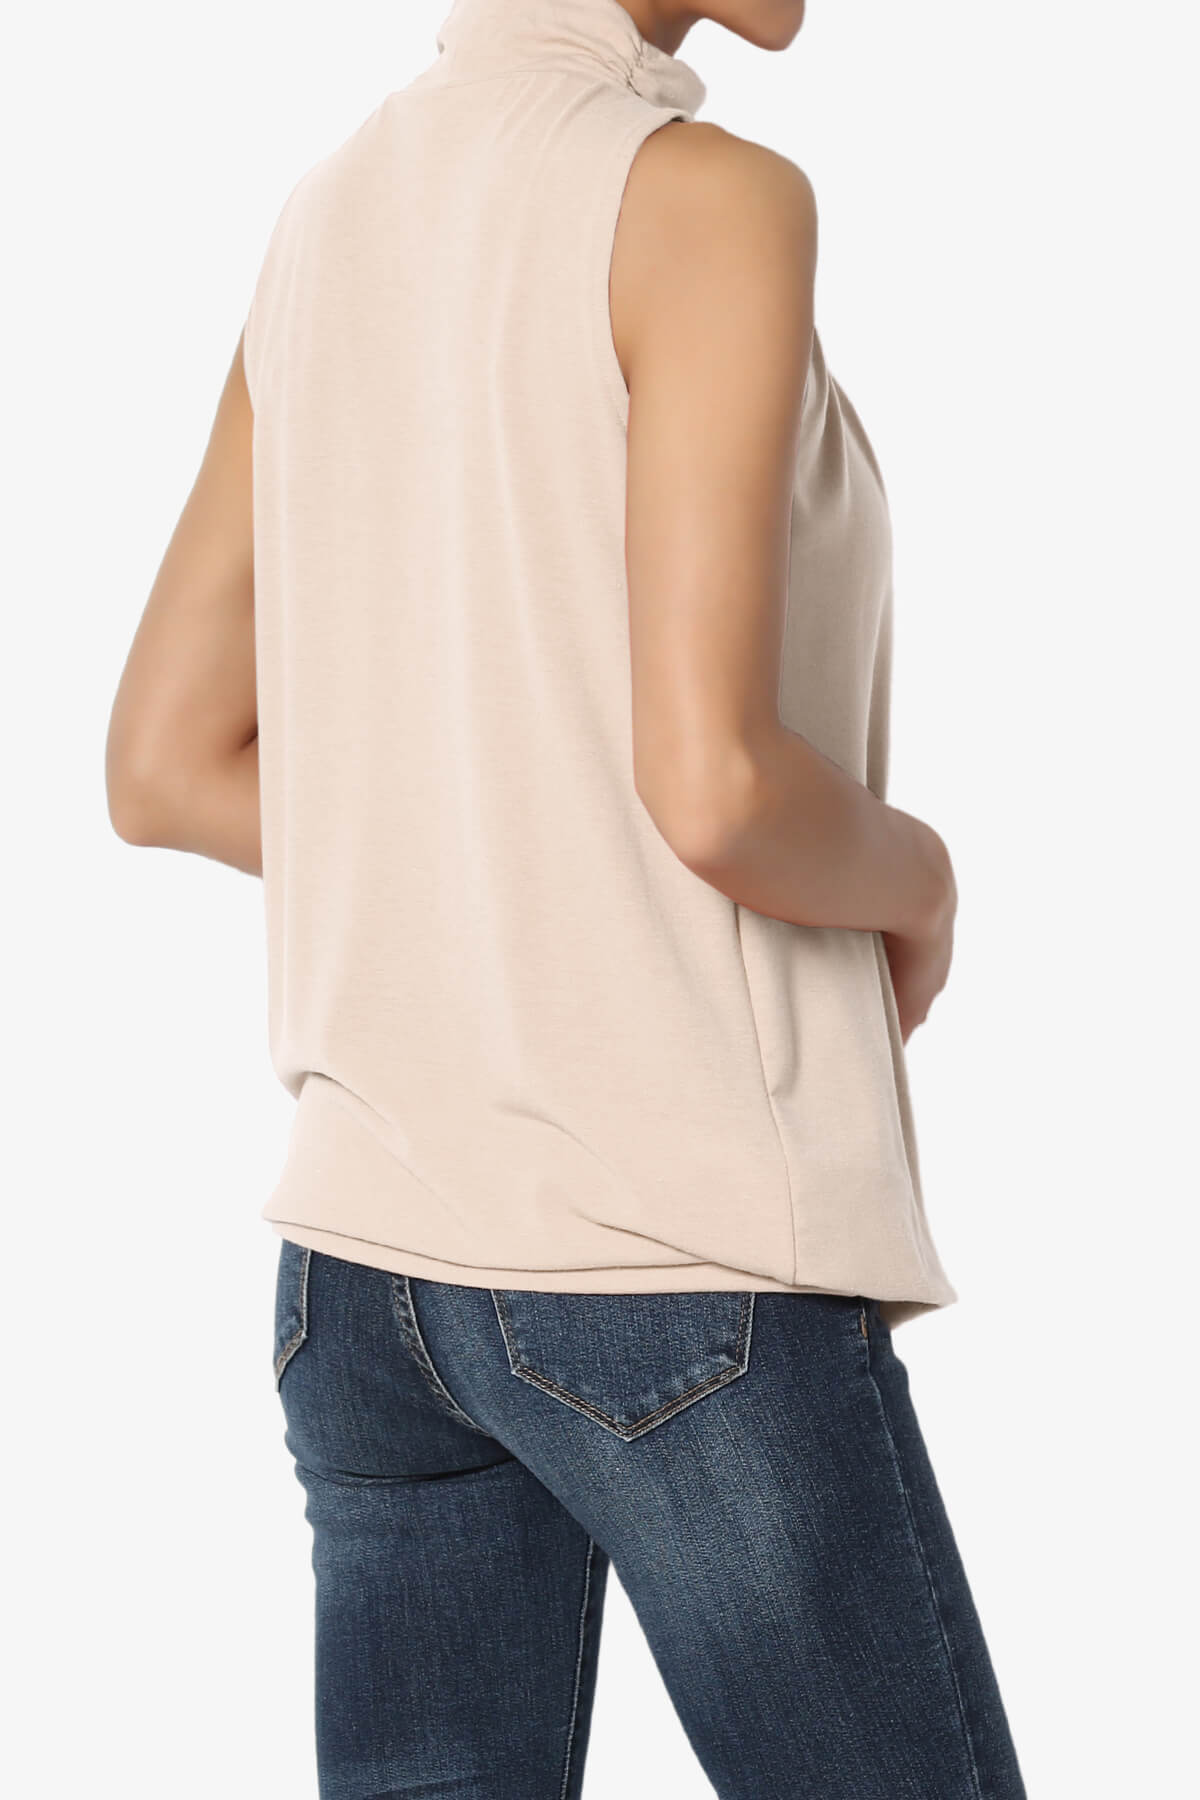 Load image into Gallery viewer, Jibbitz Sleeveless Mock Neck Pleated Top DUSTY BLUSH_4
